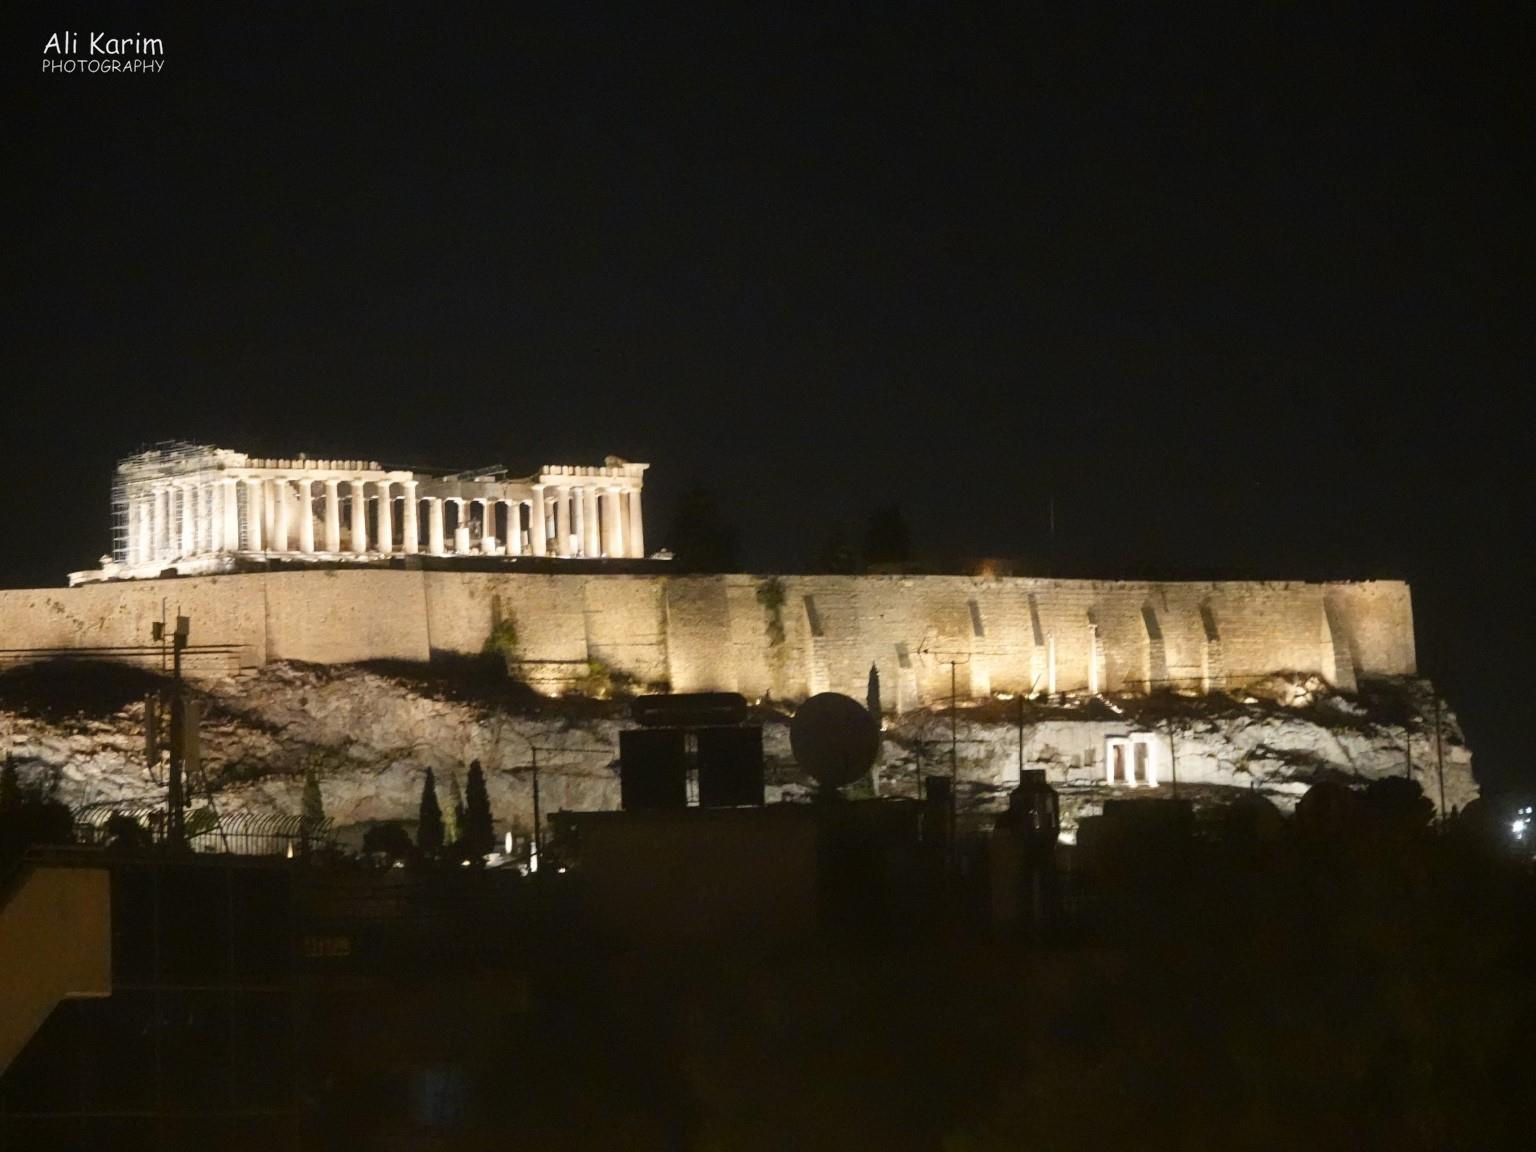 Athens, Greece, June, 2021, Night view of the Parthenon on the Acropolis from the city